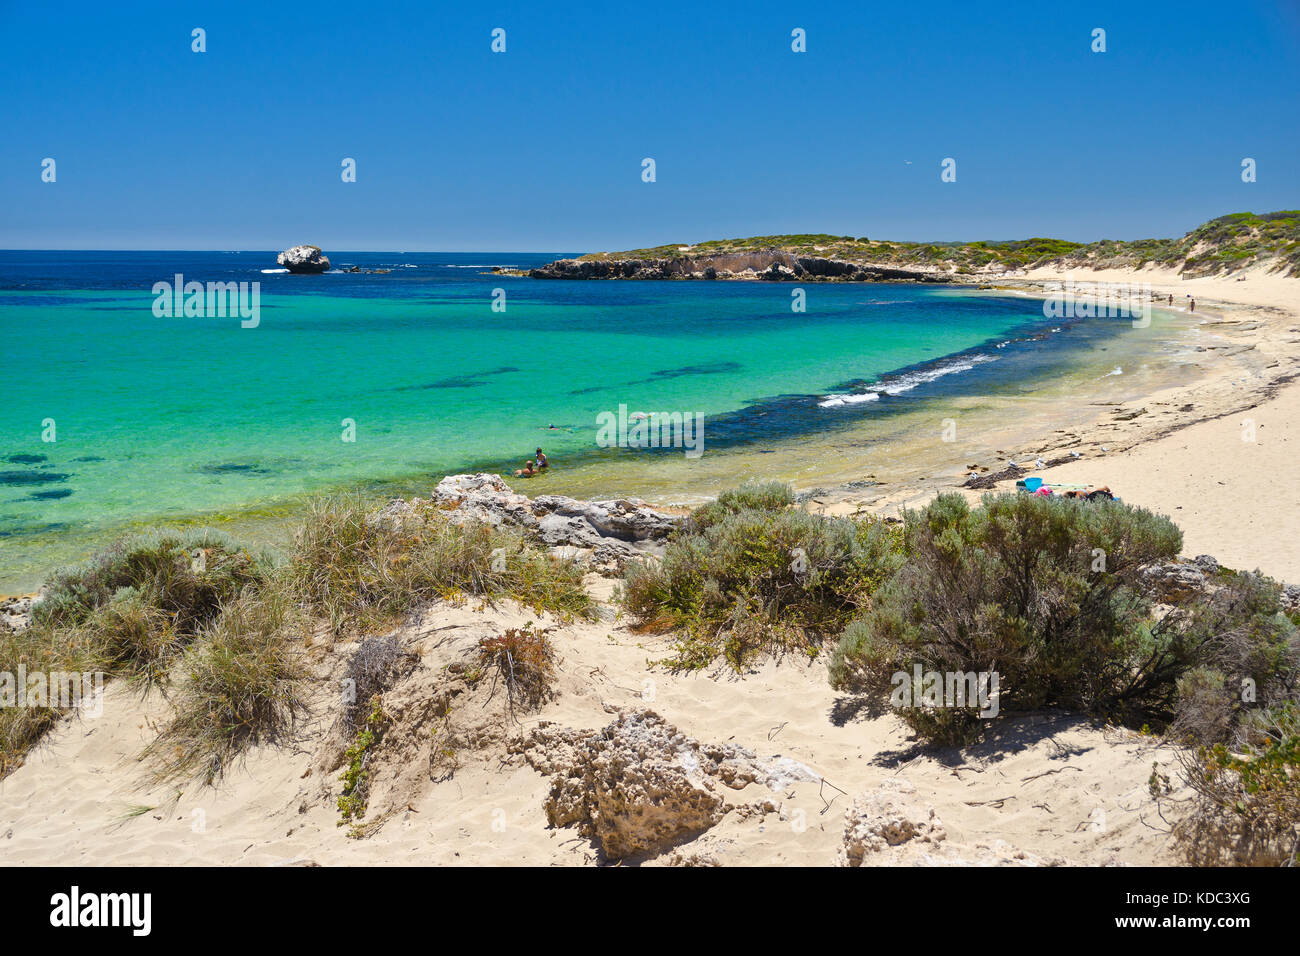 Sheltered Bay with white sandy beach on a clear day at Point Peron, Shoalwater Islands Marine Park Rockingham Western Australia Stock Photo